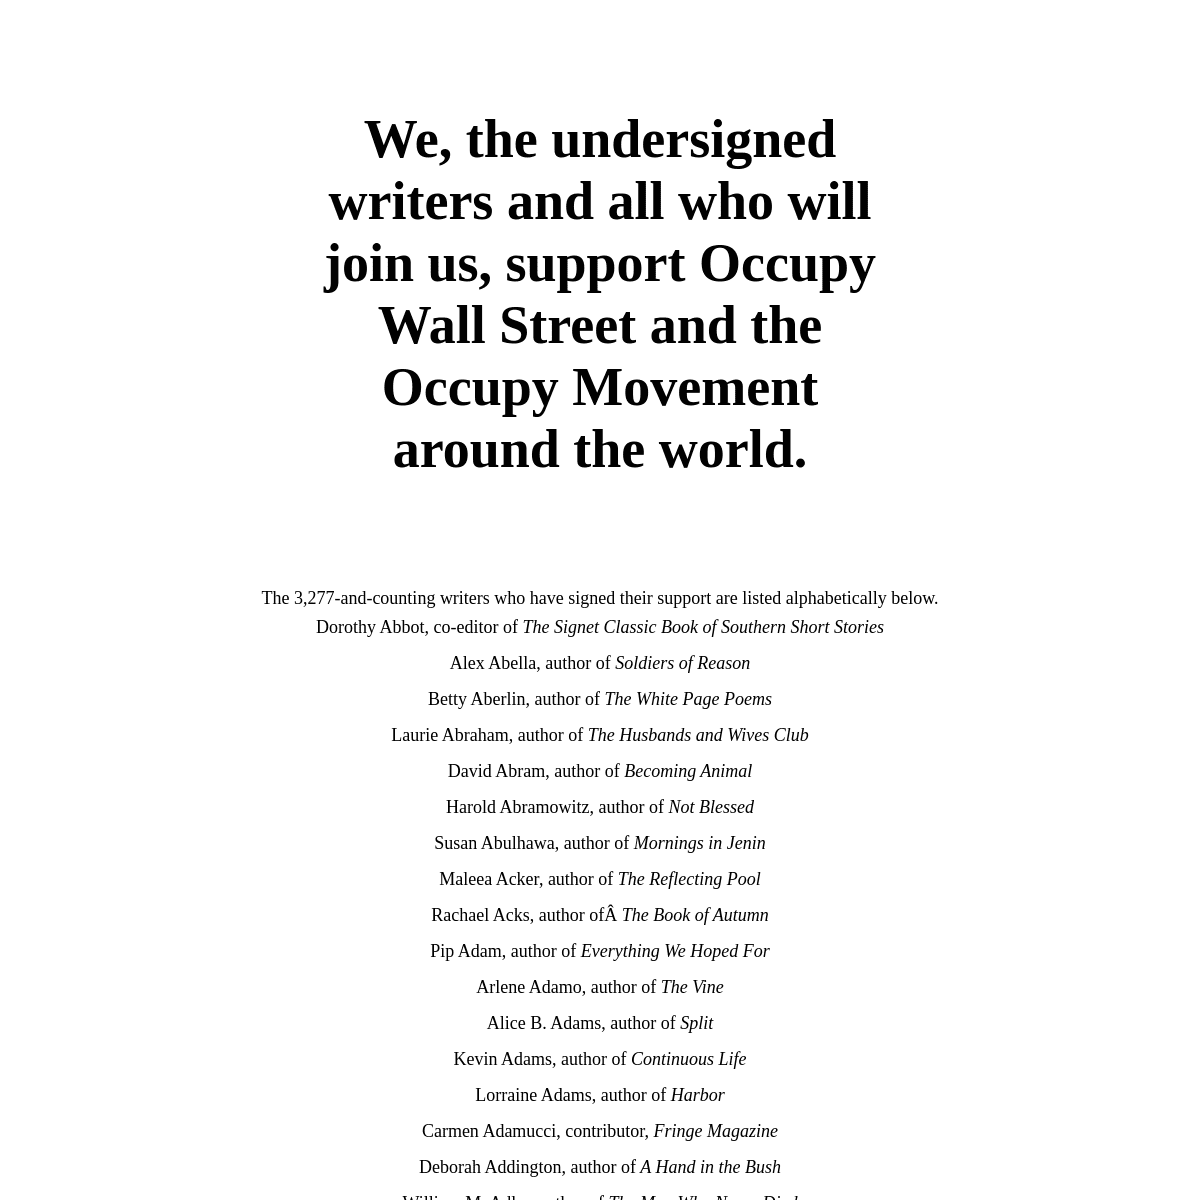 A complete backup of https://occupywriters.com